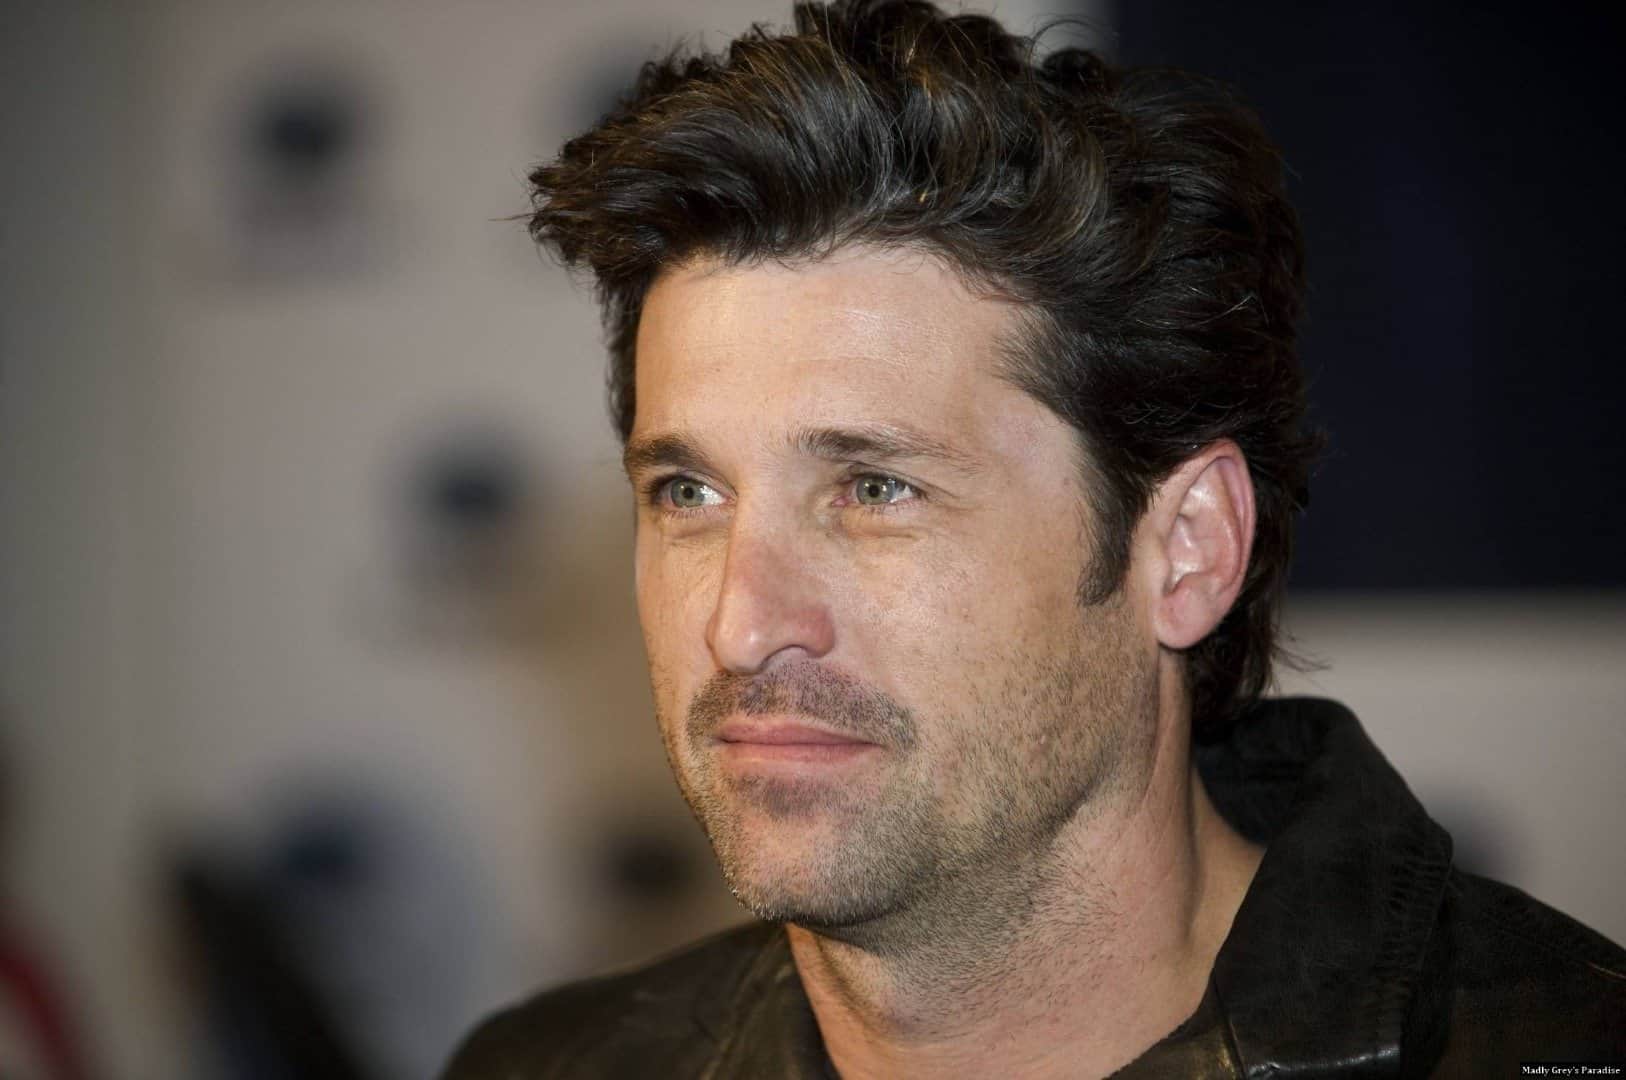 Grey’s Anatomy Fans Start Petition To Bring “McDreamy” Back